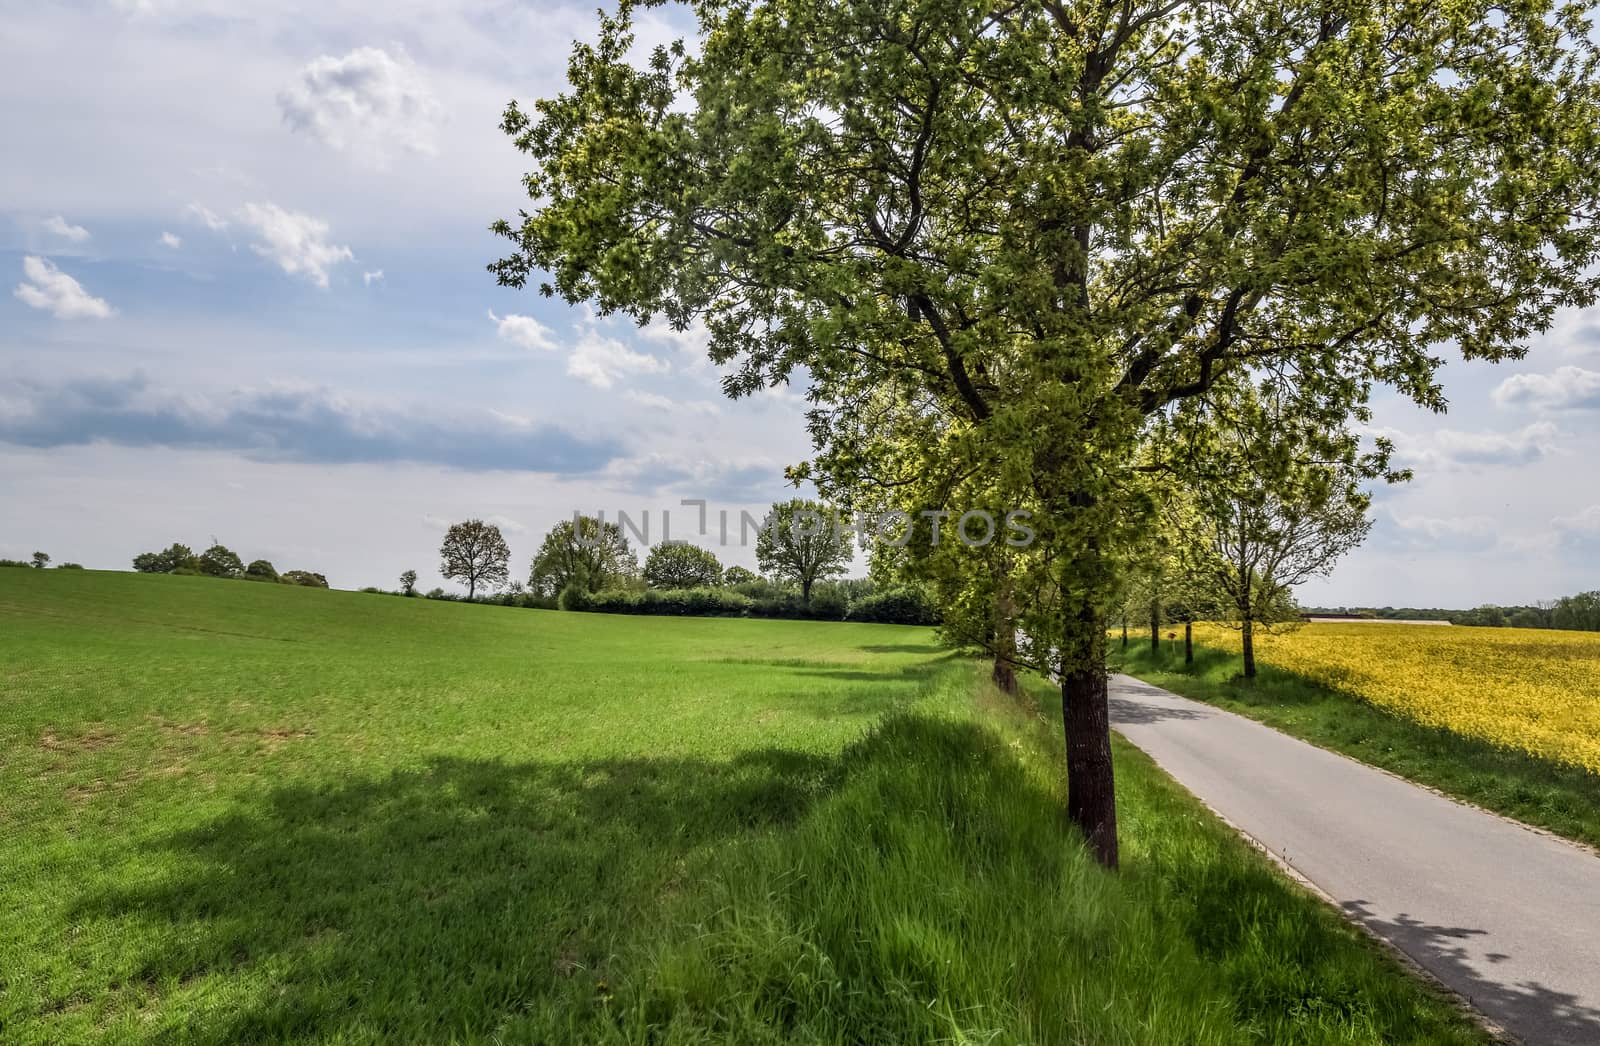 Beautiful view on countryside roads with fields and trees in nor by MP_foto71